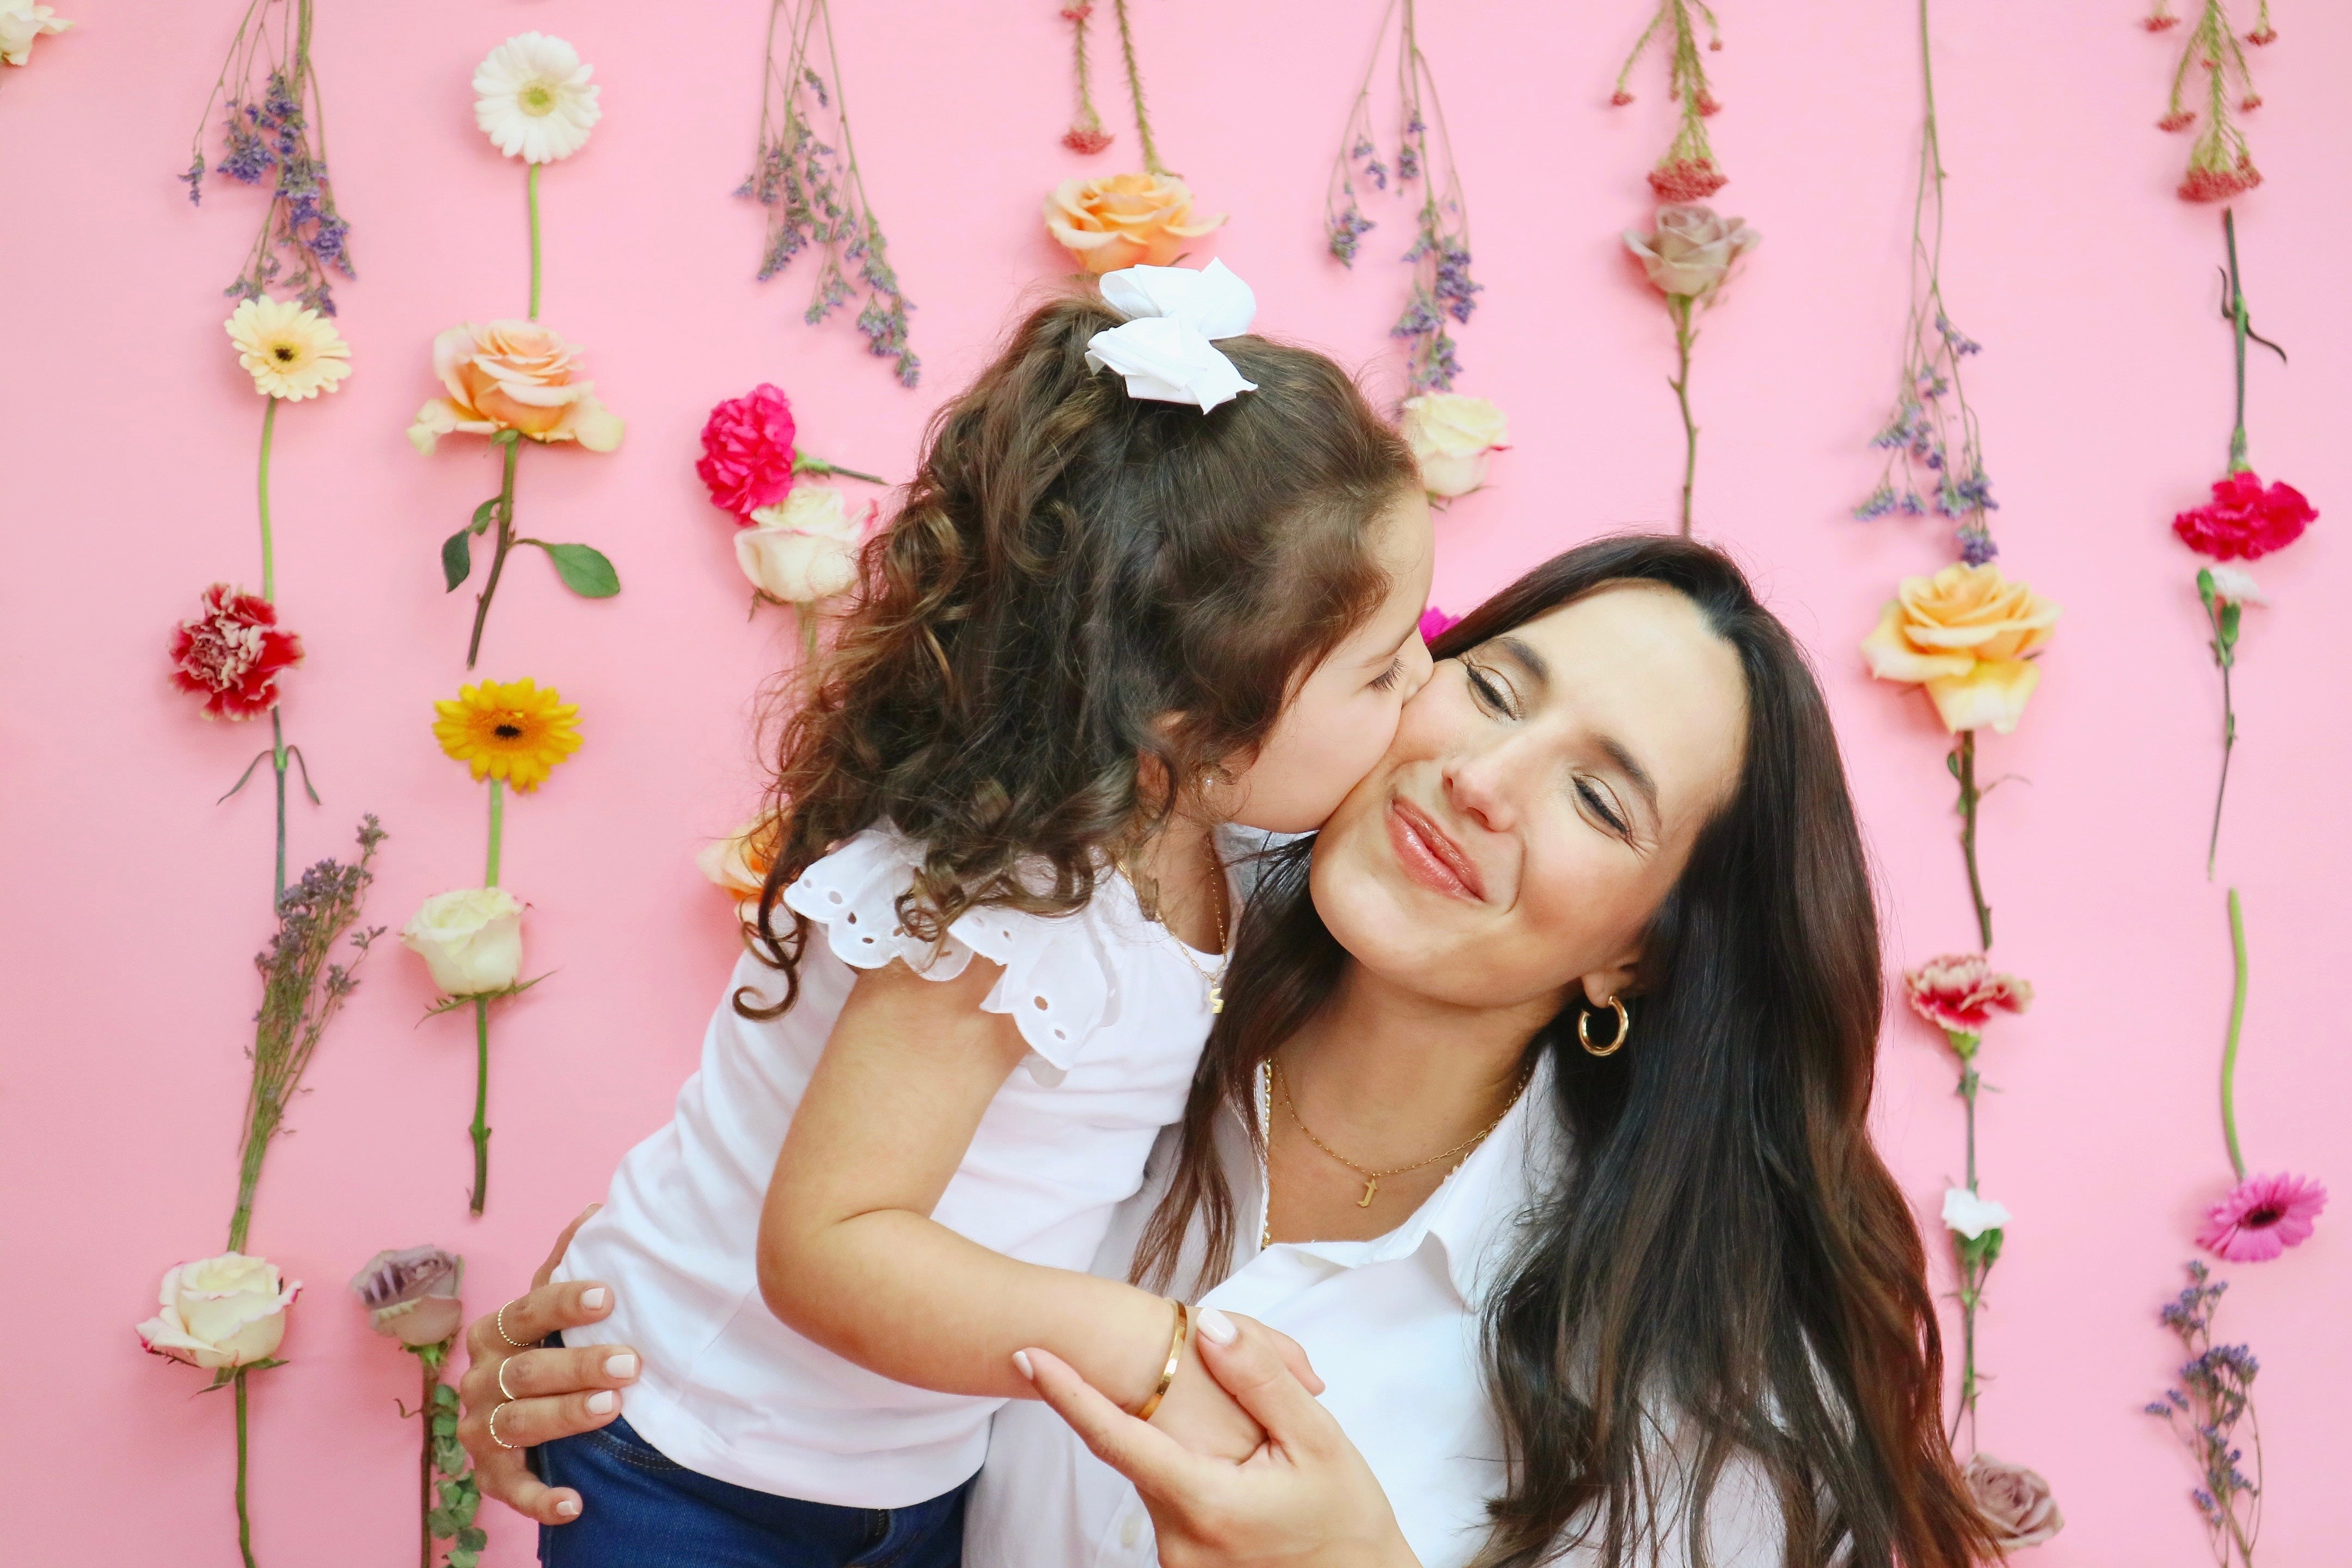 Mother’s Appreciation: This One Goes Out to all the Mamas